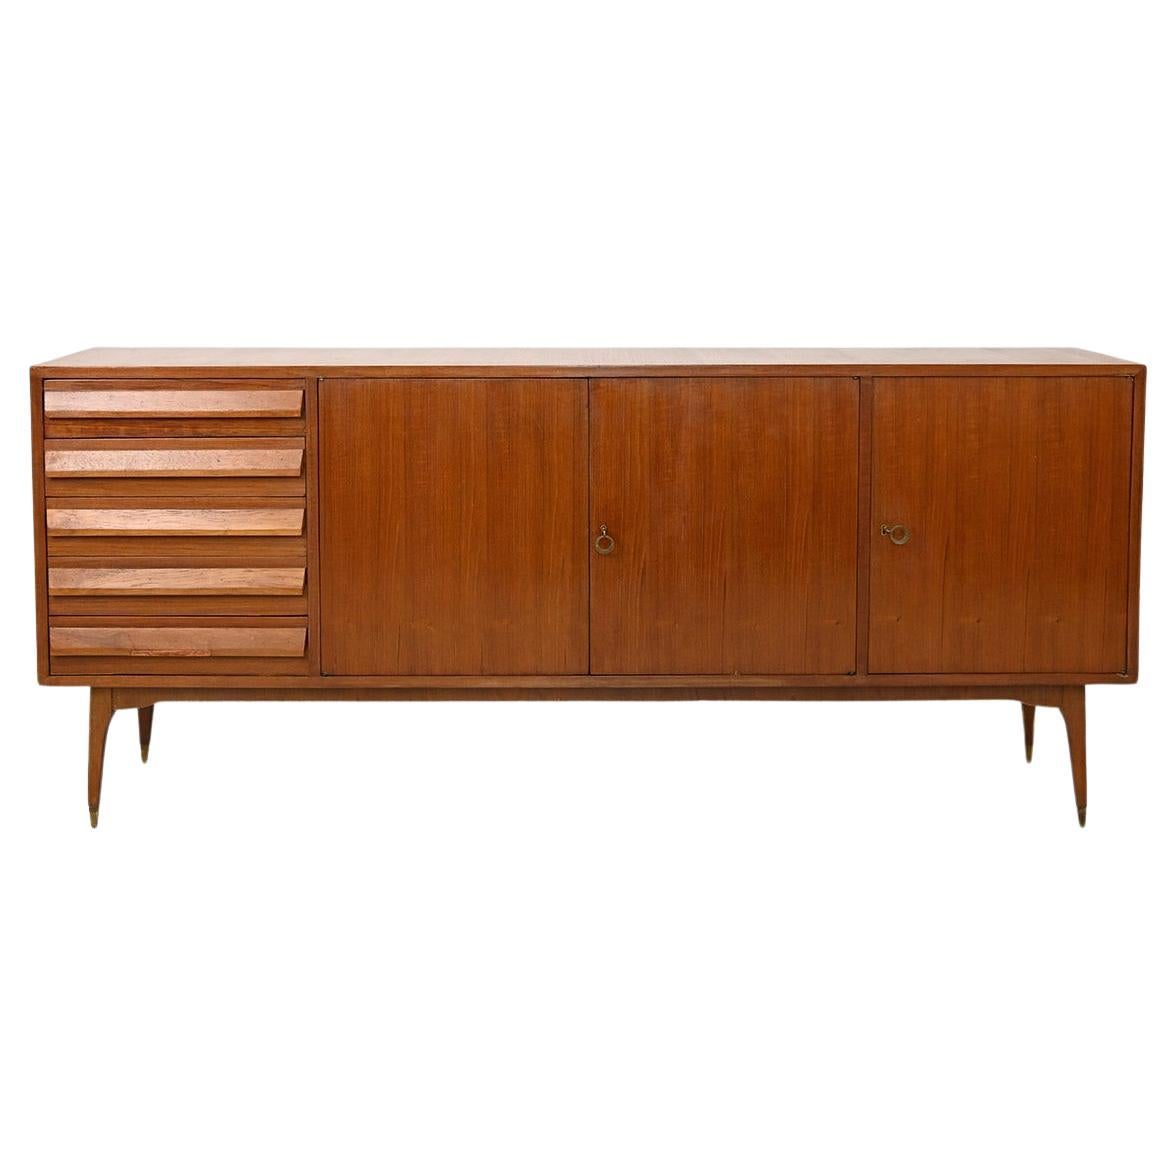 Italian-Made Sideboard For Sale